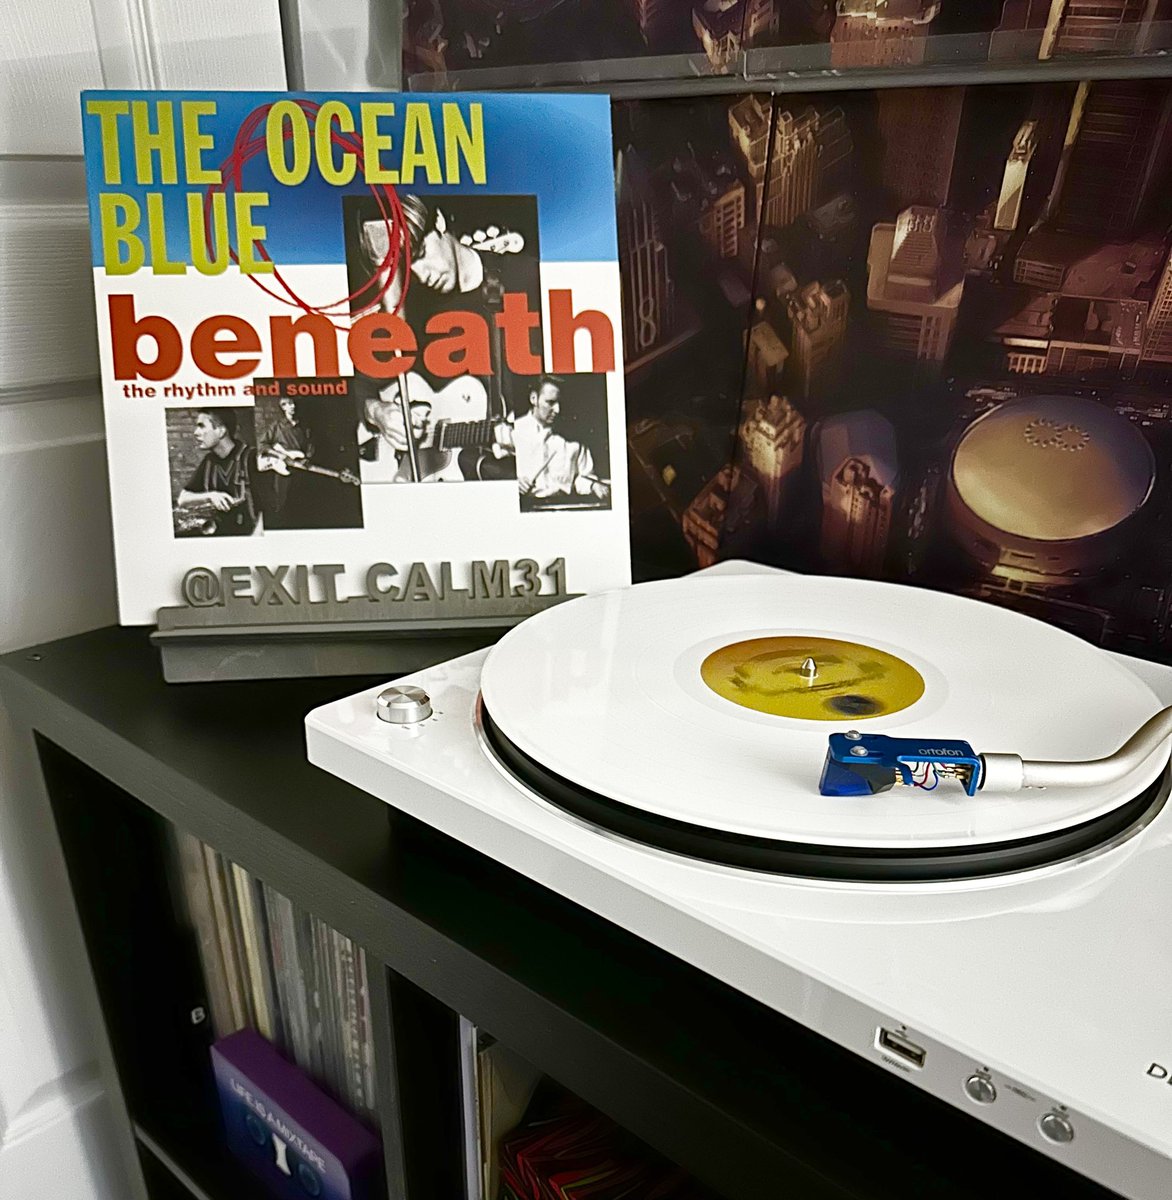 #1993Top20 17 The Ocean Blue - Cathedral Bells A “should’ve been a single” moment off the band’s final album with Sire Records and with the original lineup. @theoceanblue was America’s answer to The Smiths and deserved a much bigger stage. youtu.be/1STKgMZEcws?si…